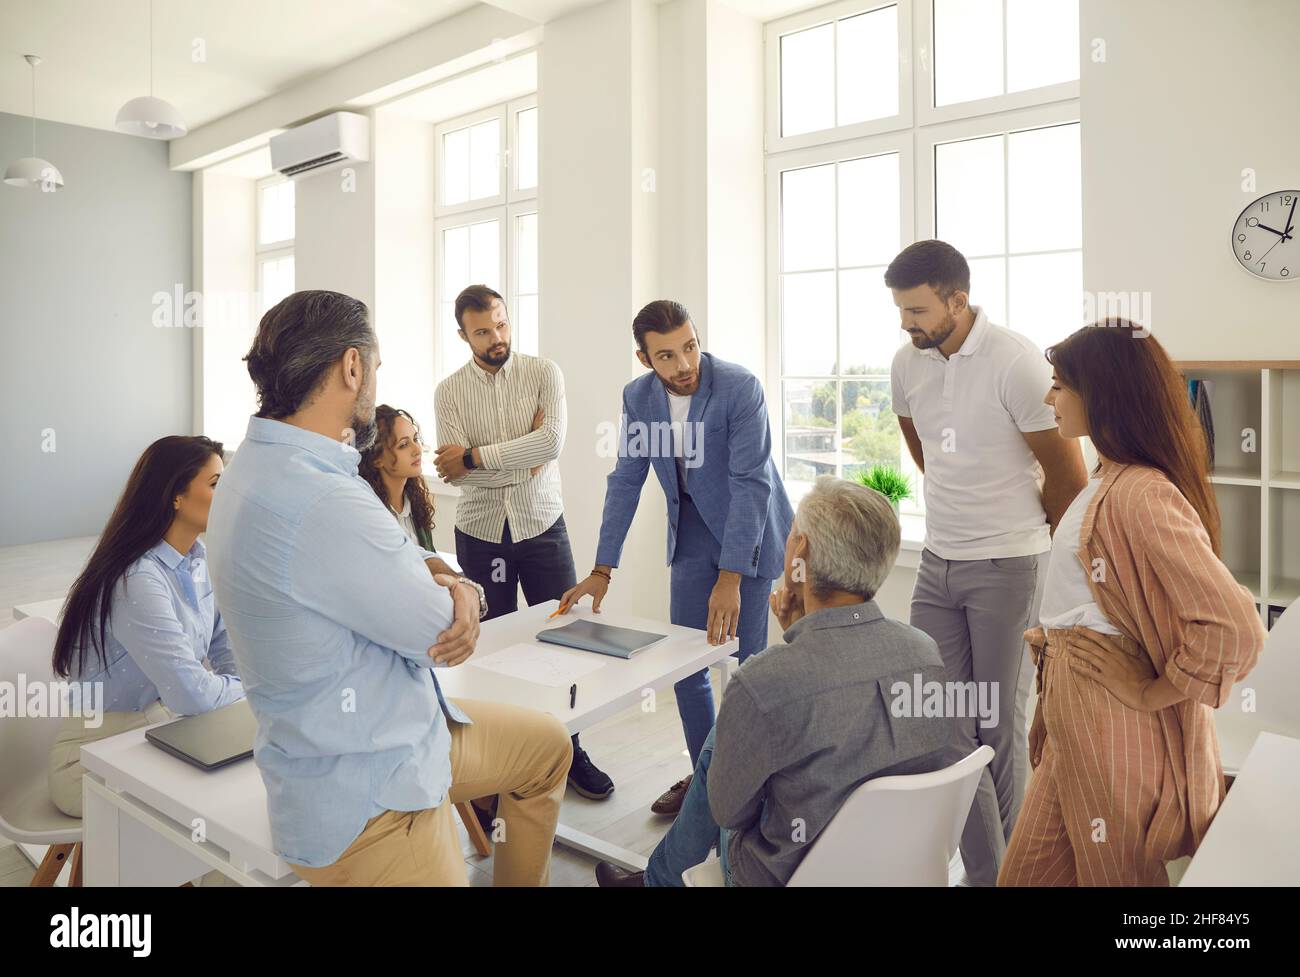 Group of young and senior business people having a discussion during a work meeting Stock Photo